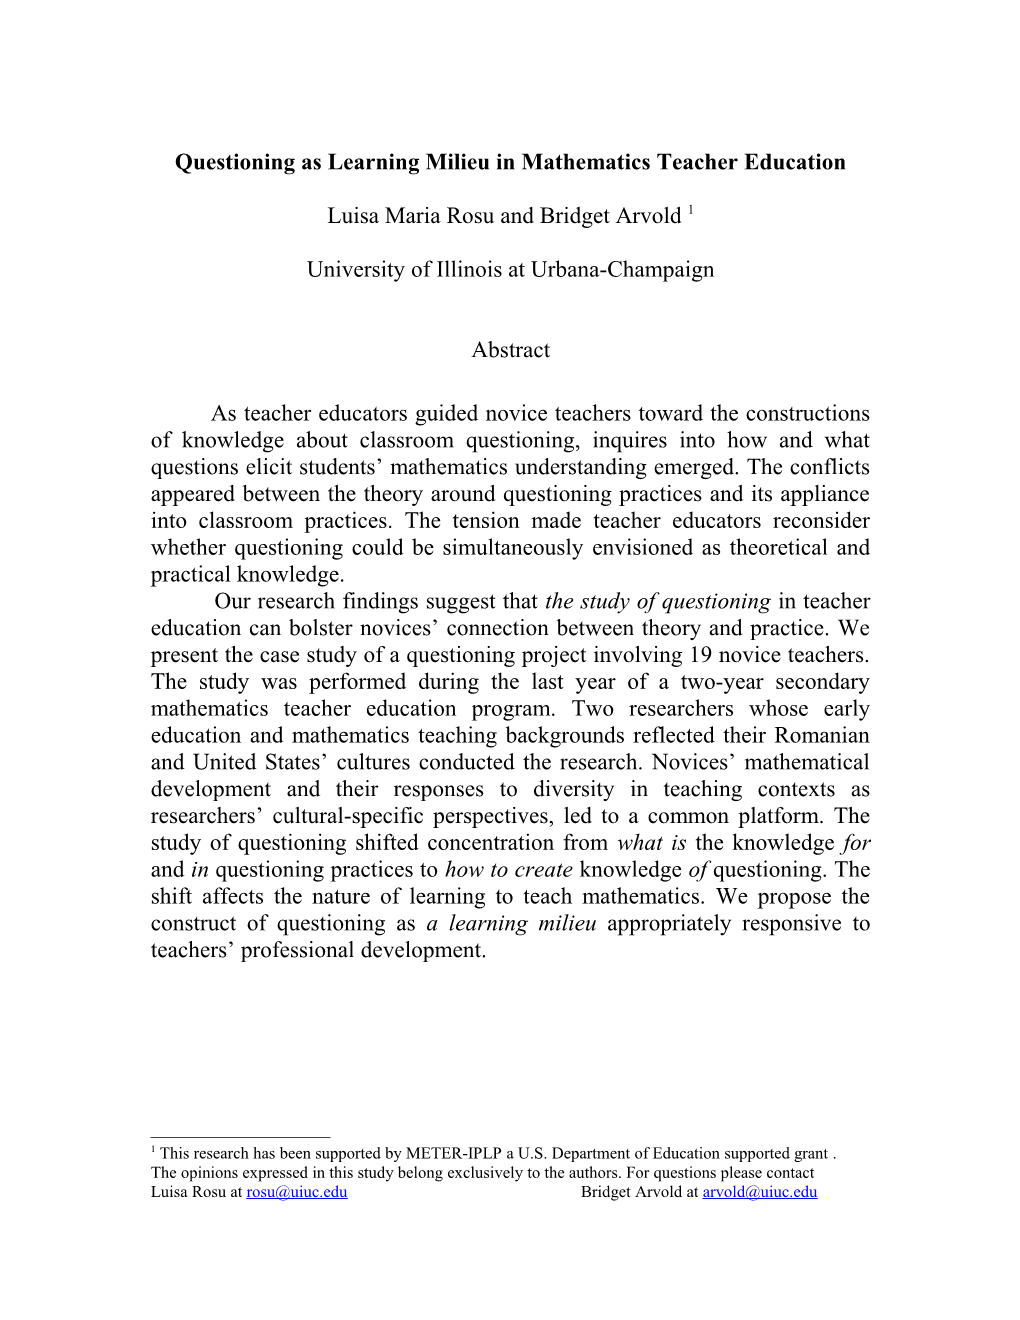 Questioning As Learning Milieu in Mathematics Teacher Education